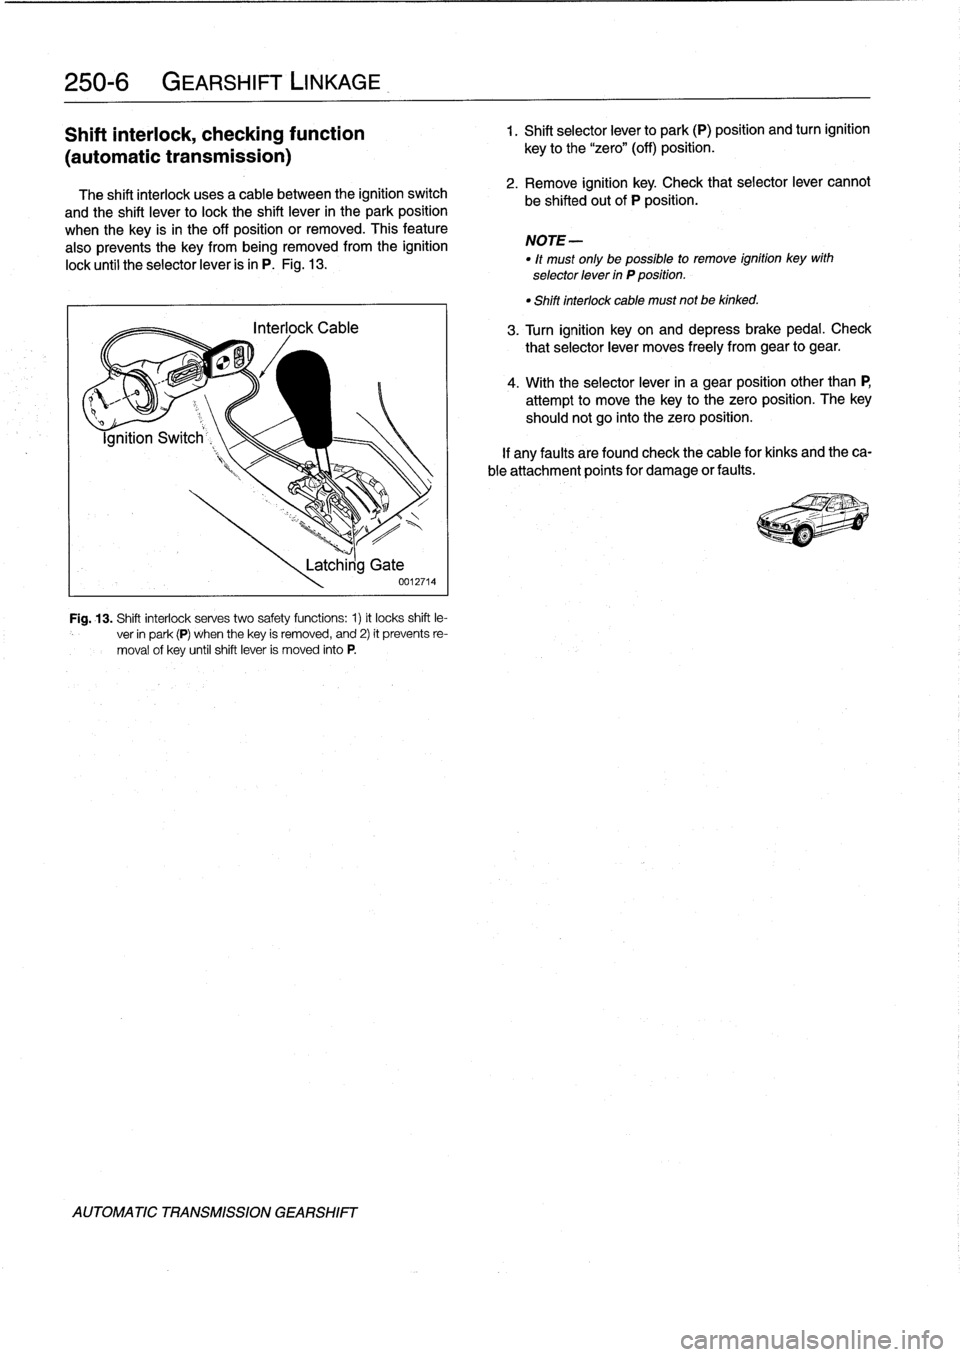 BMW 325i 1994 E36 Owners Guide 
250-
6

	

GEARSHIFT
LINKAGE

Shift
interlock,
checking
function

	

1
.
Shift
selectorlever
to
park
(P)
position
and
turn
ignition

(automatic
transmission)

The
shift
interlock
usesa
cable
between
